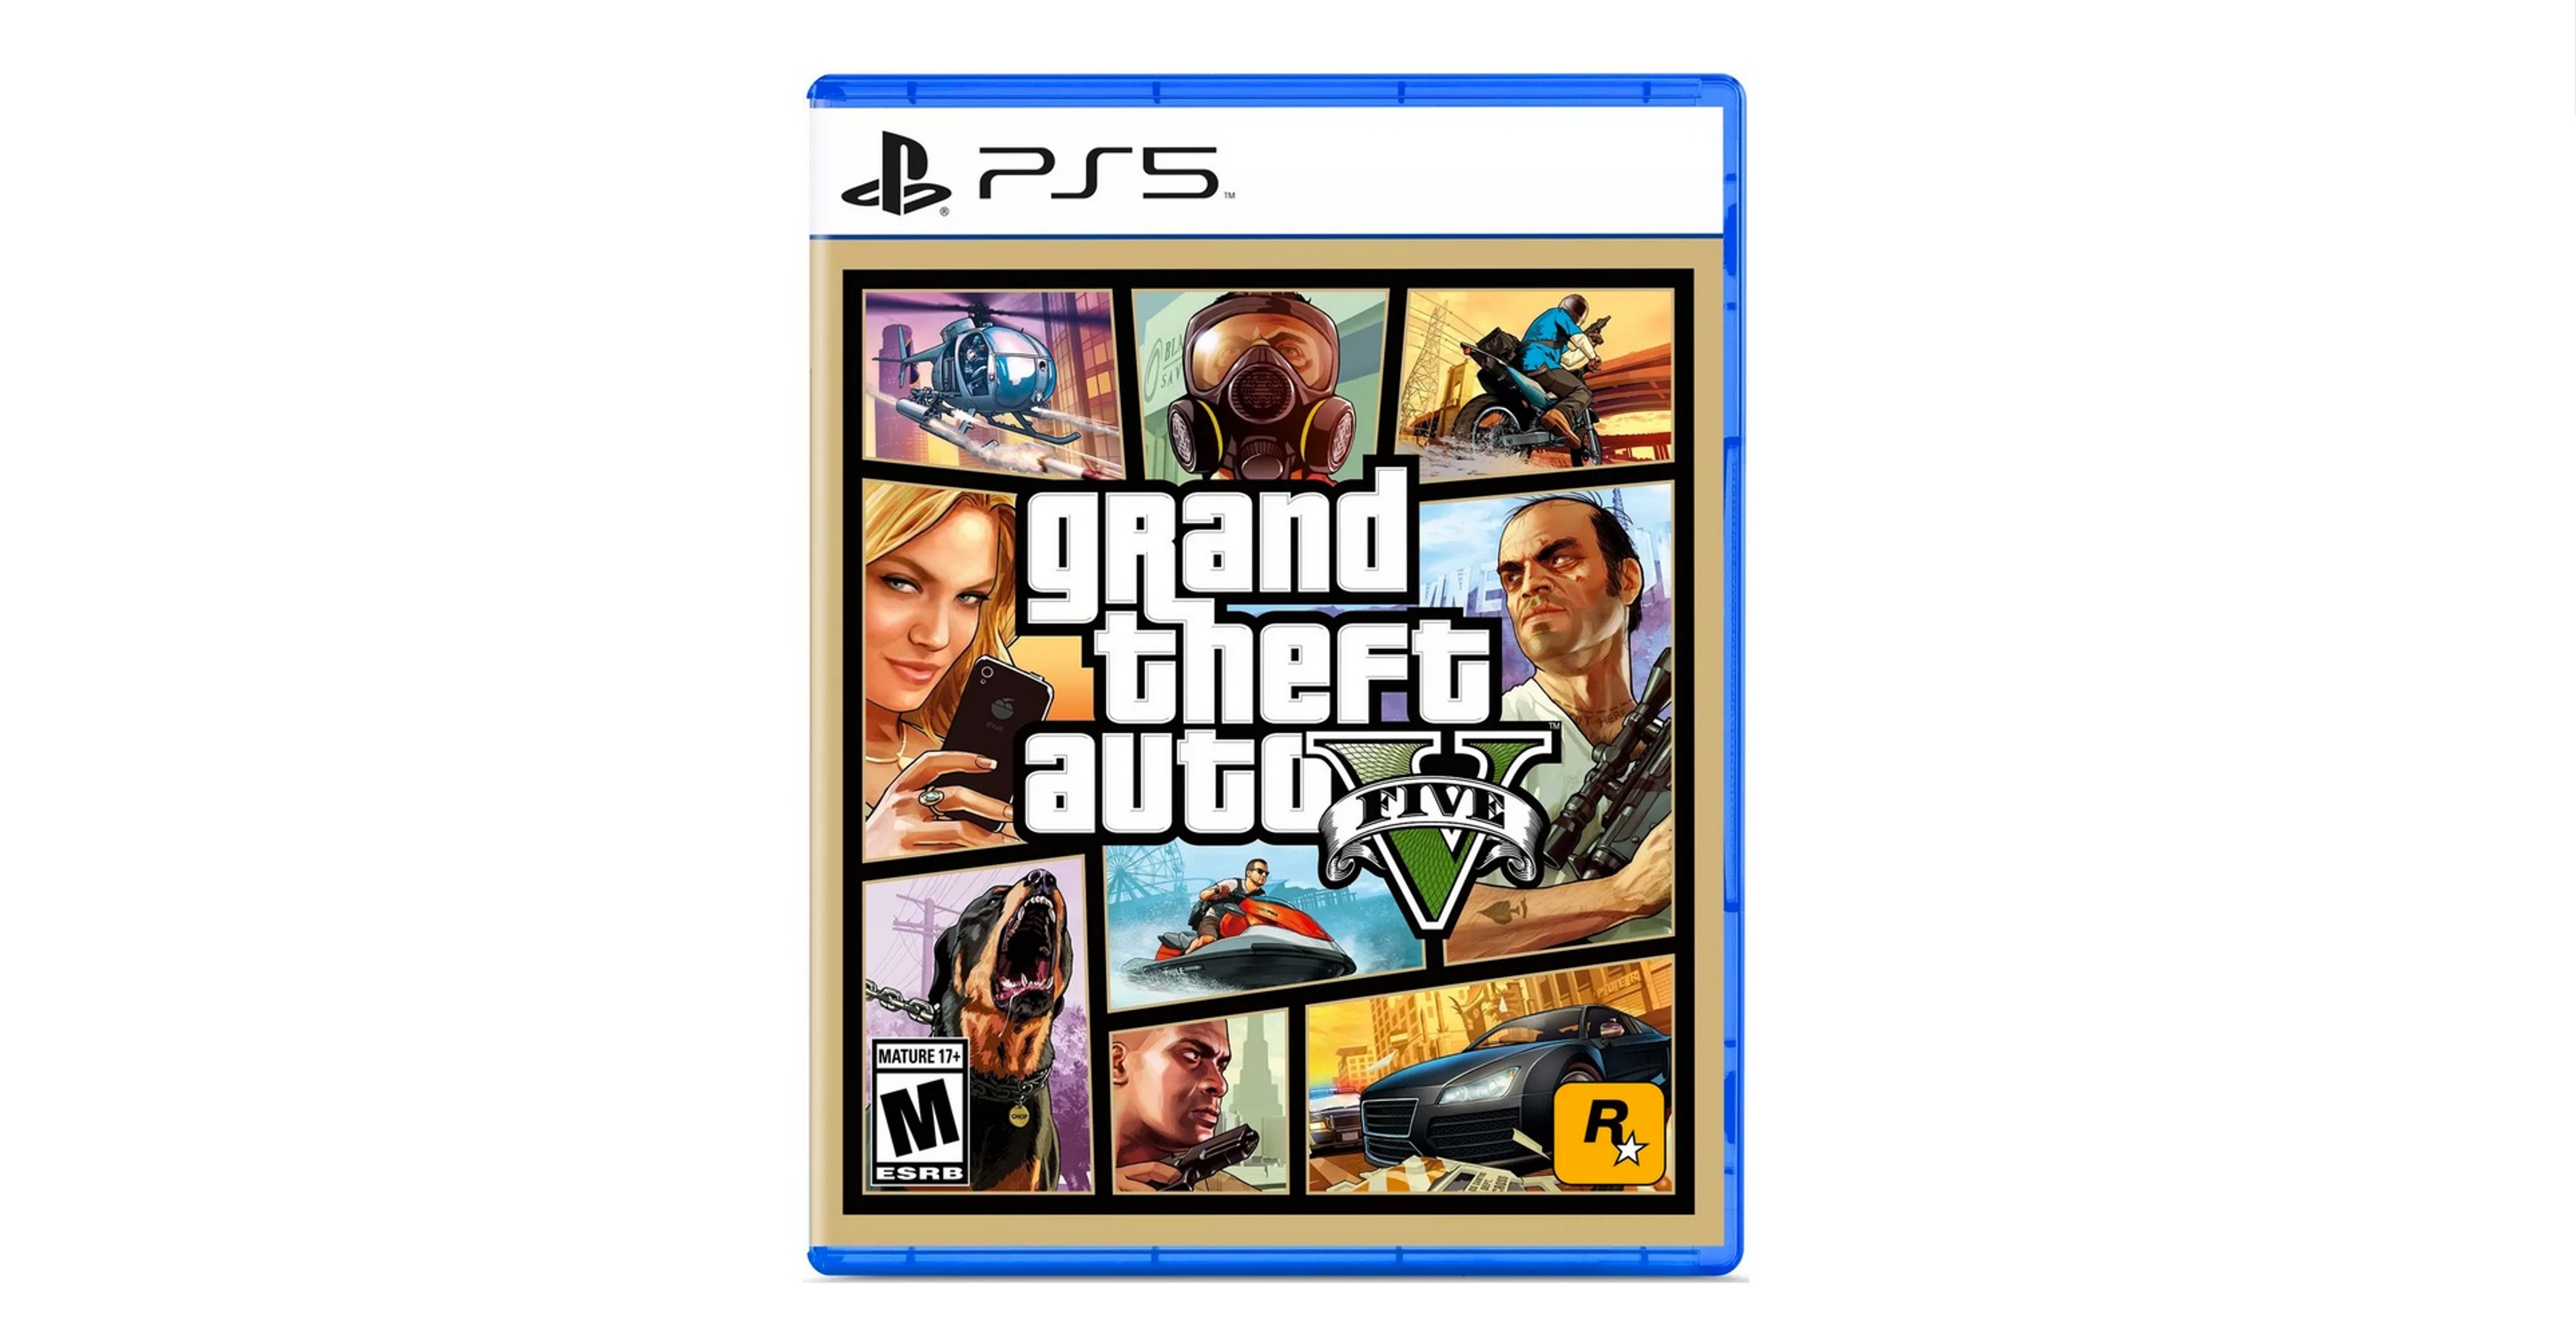 Grand Theft Auto V Is One Of The Most Popular Video Games But It Doesn&#39;t Want Your NFTs